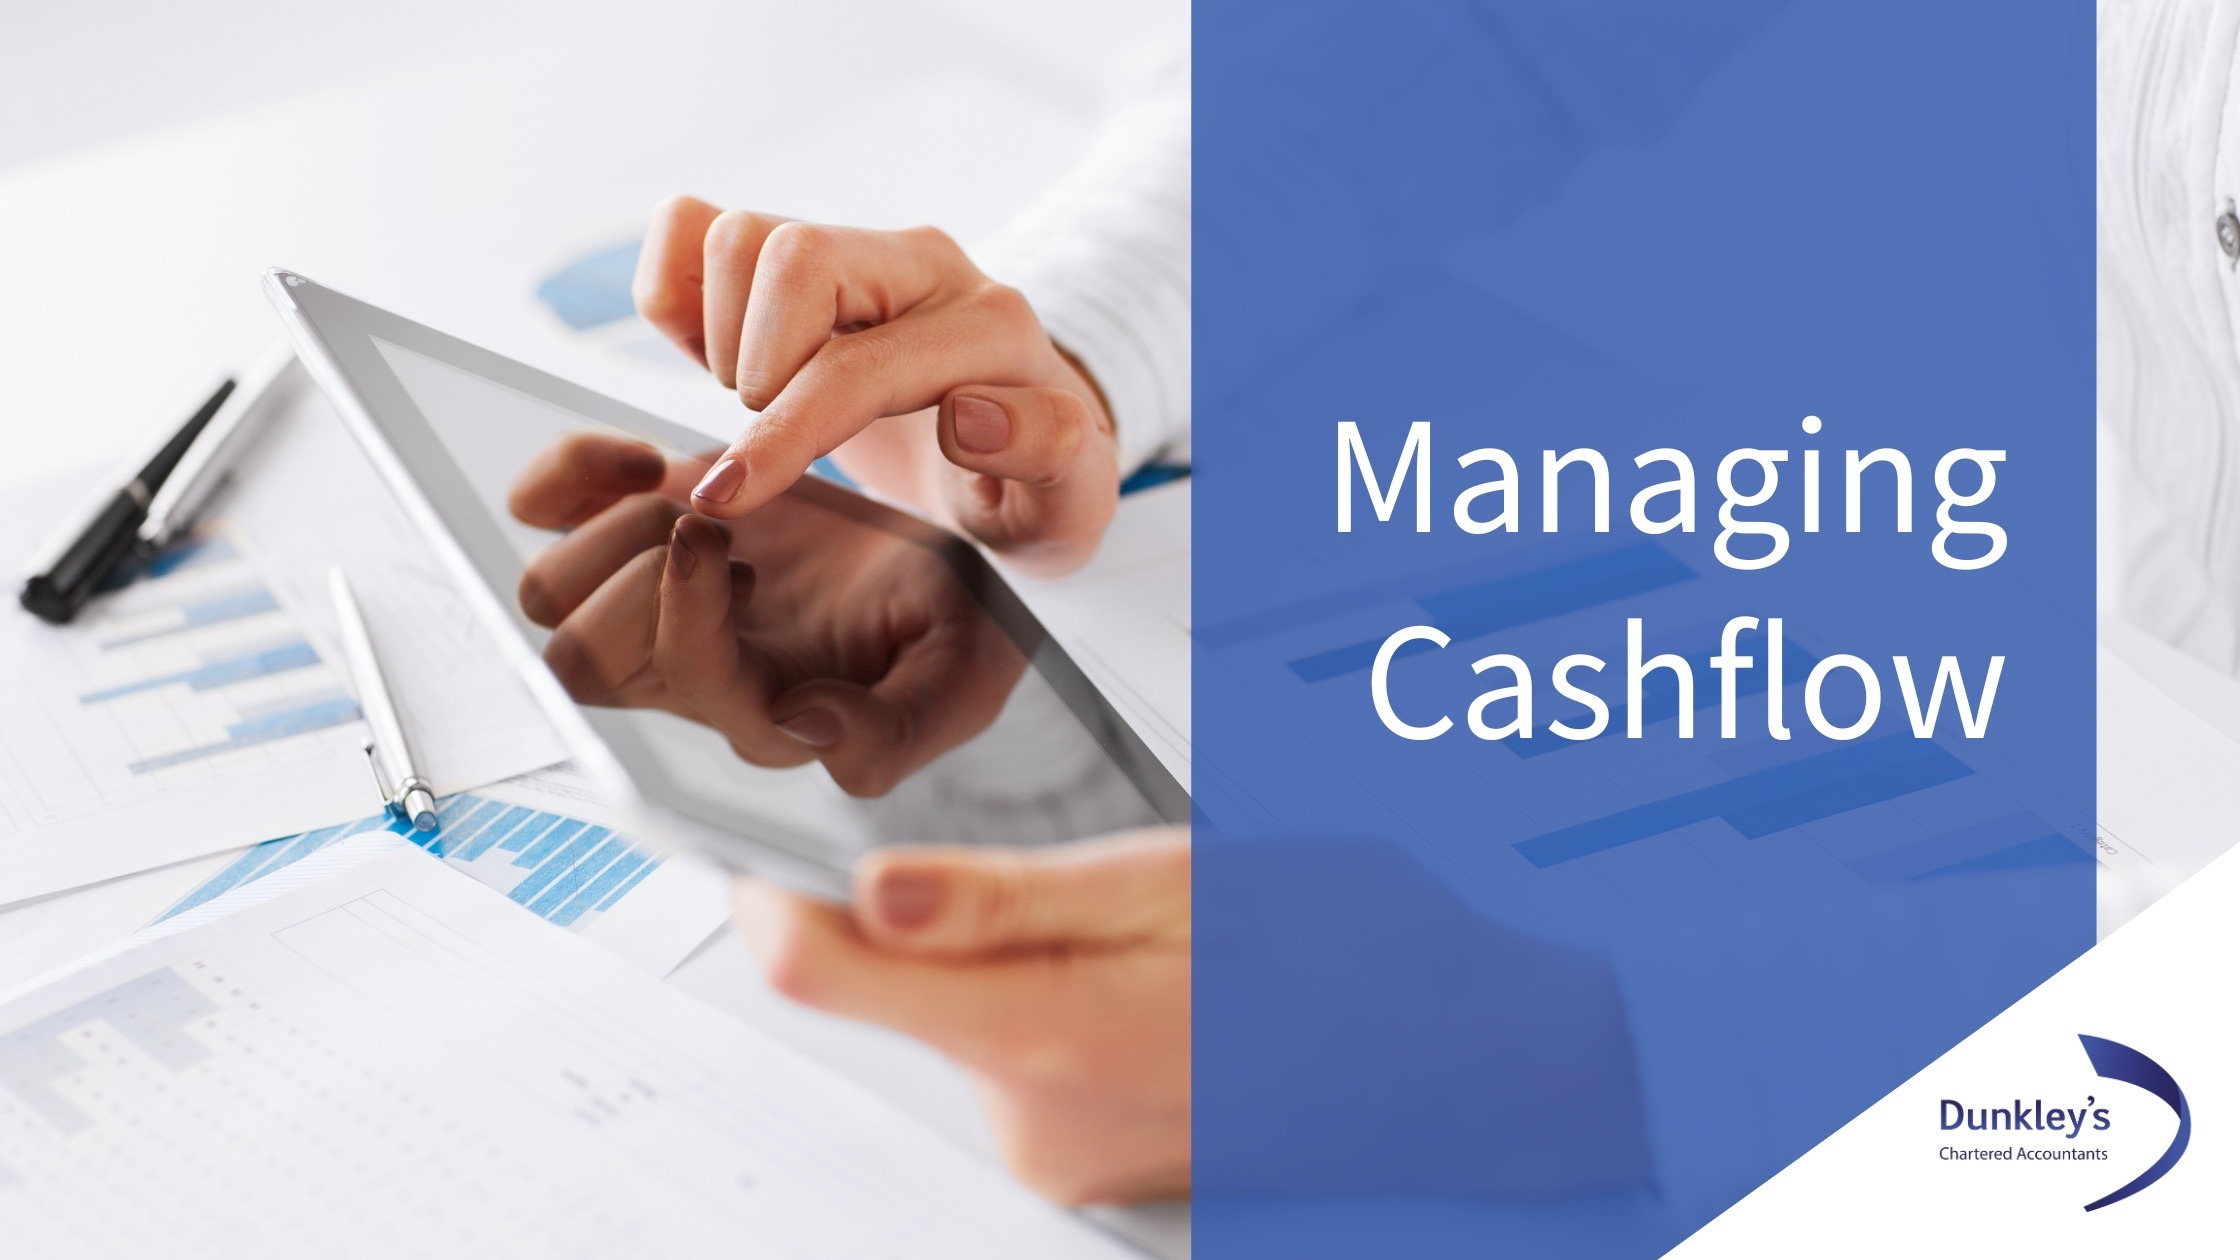 Managing Cashflow: Tips for small businesses